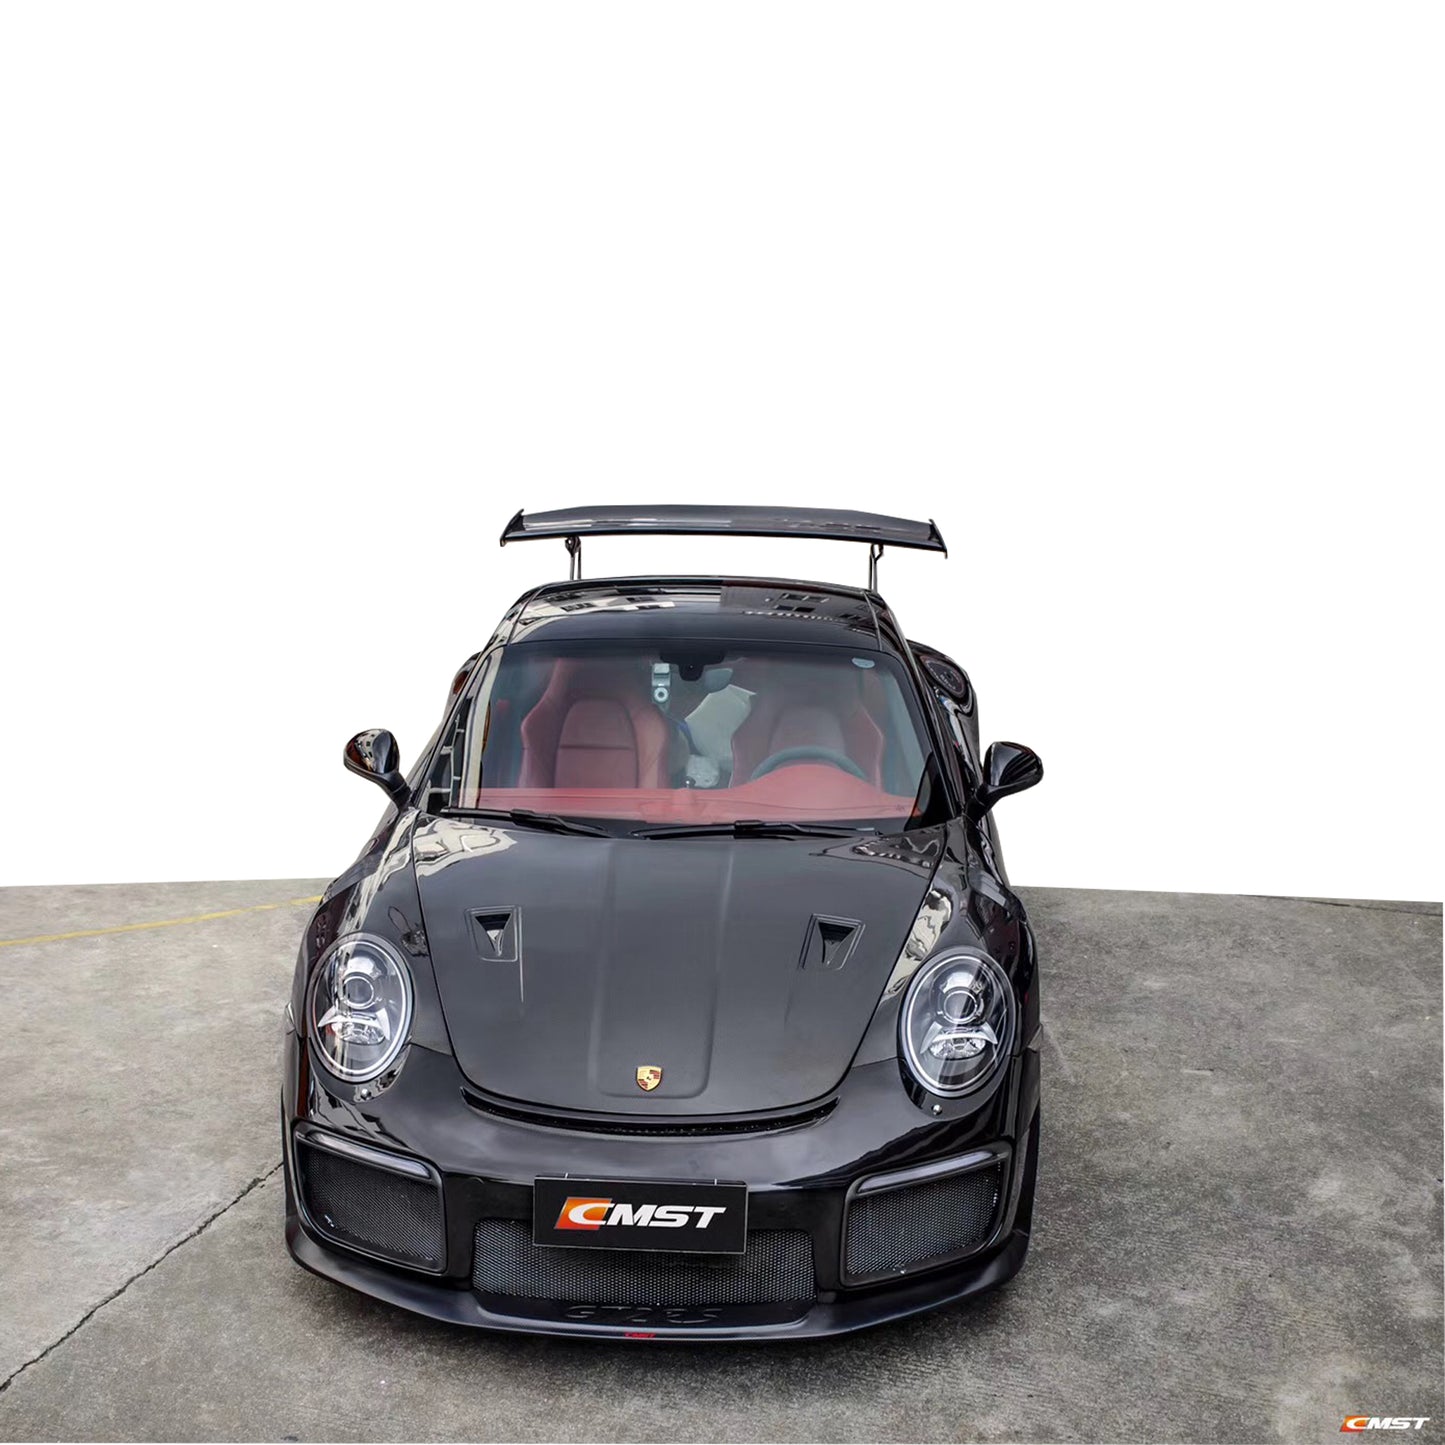 Body kit for Porsches 911 upgrades to 911 GT2 RS